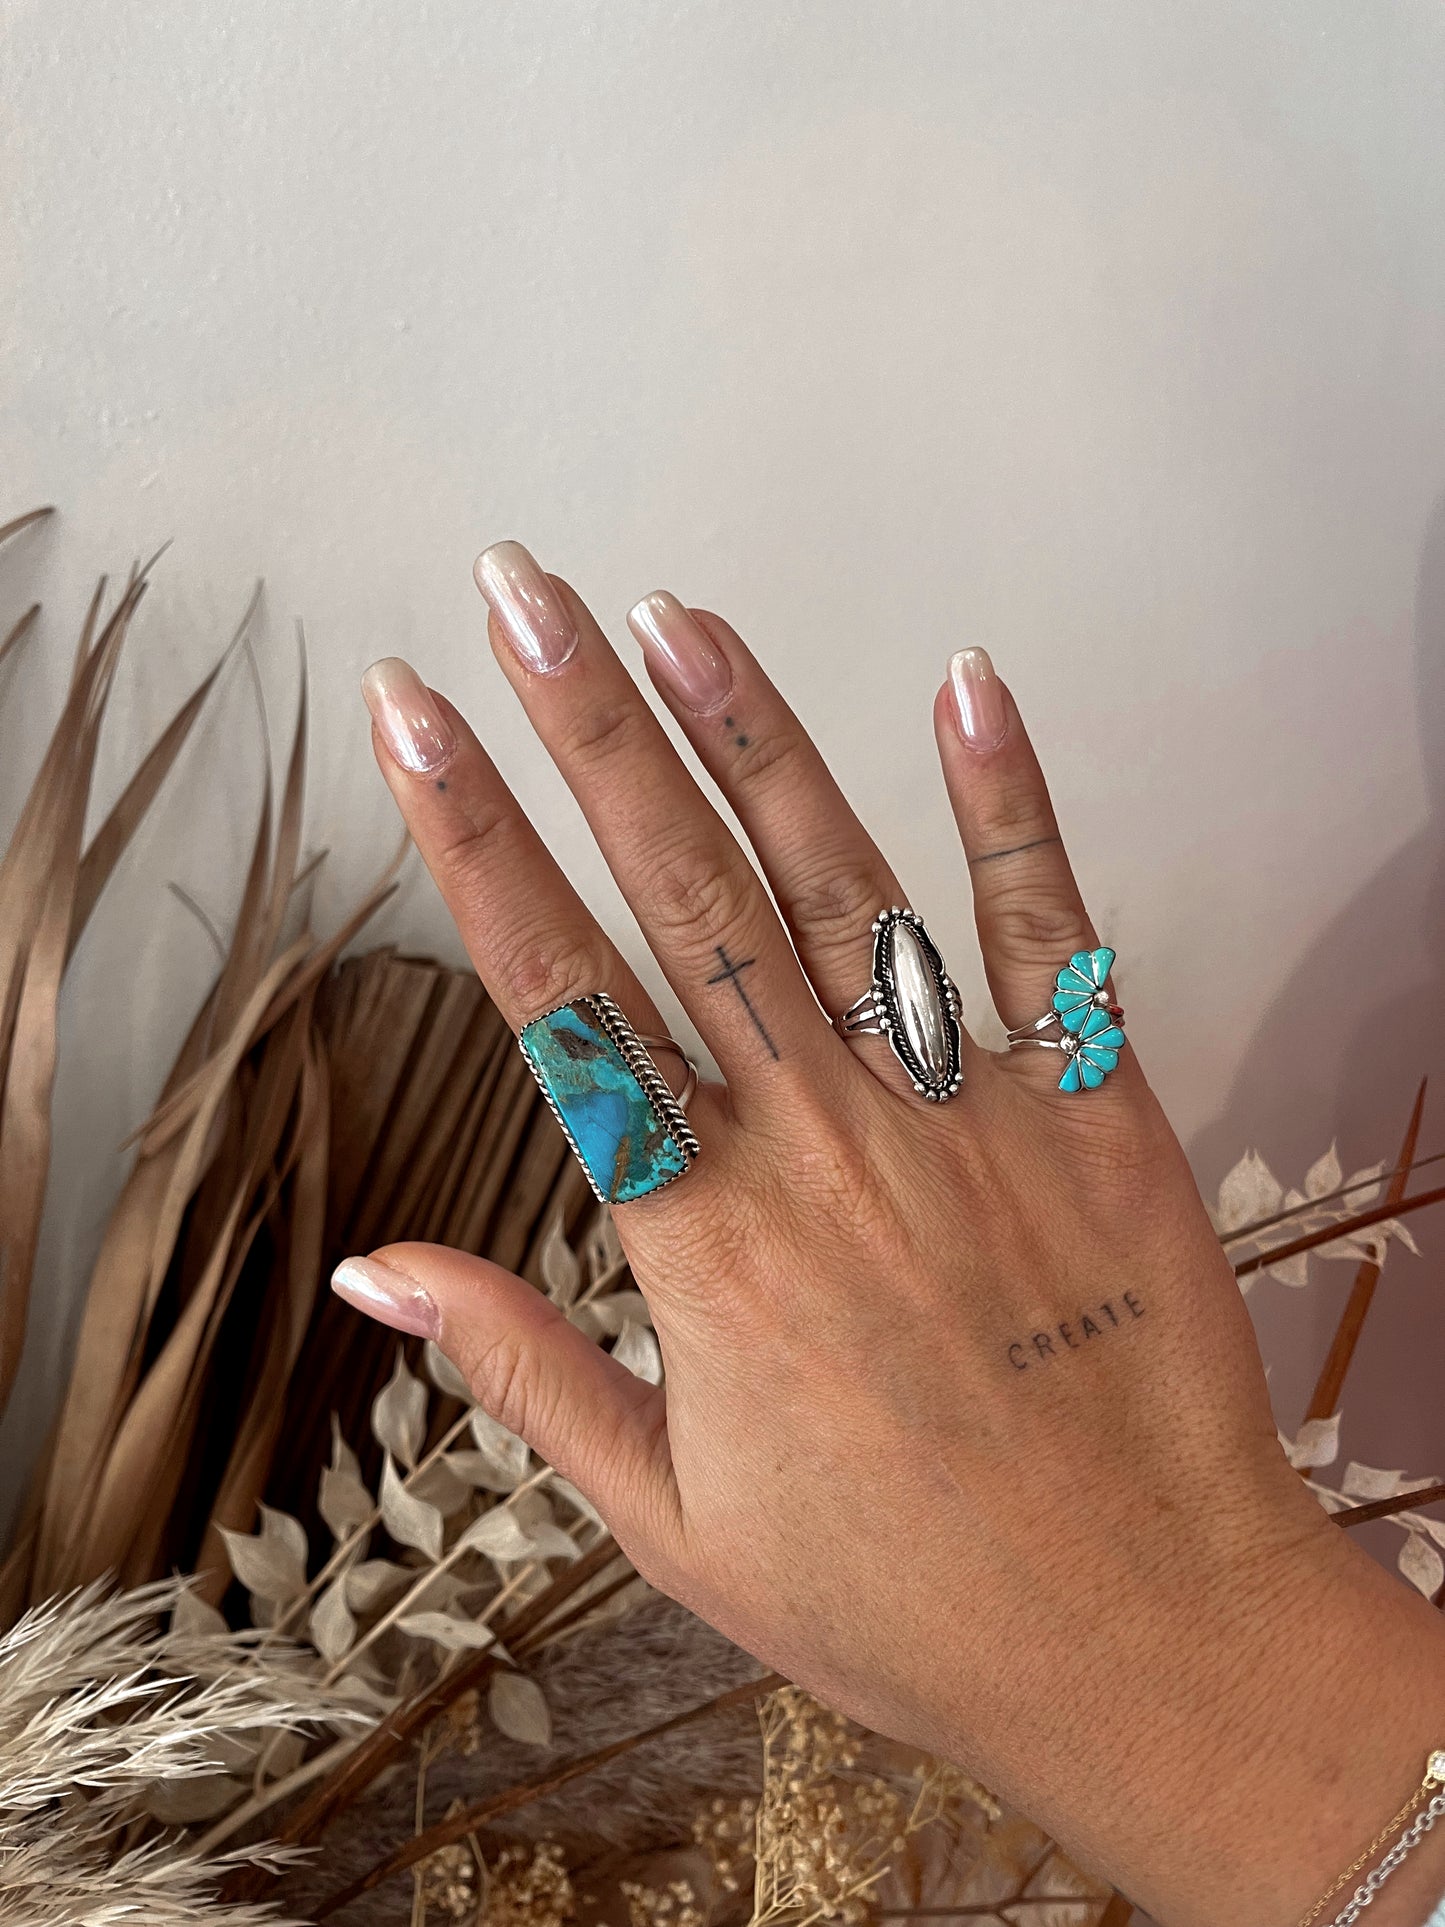 The Vintage Turquoise Seahorse Ring